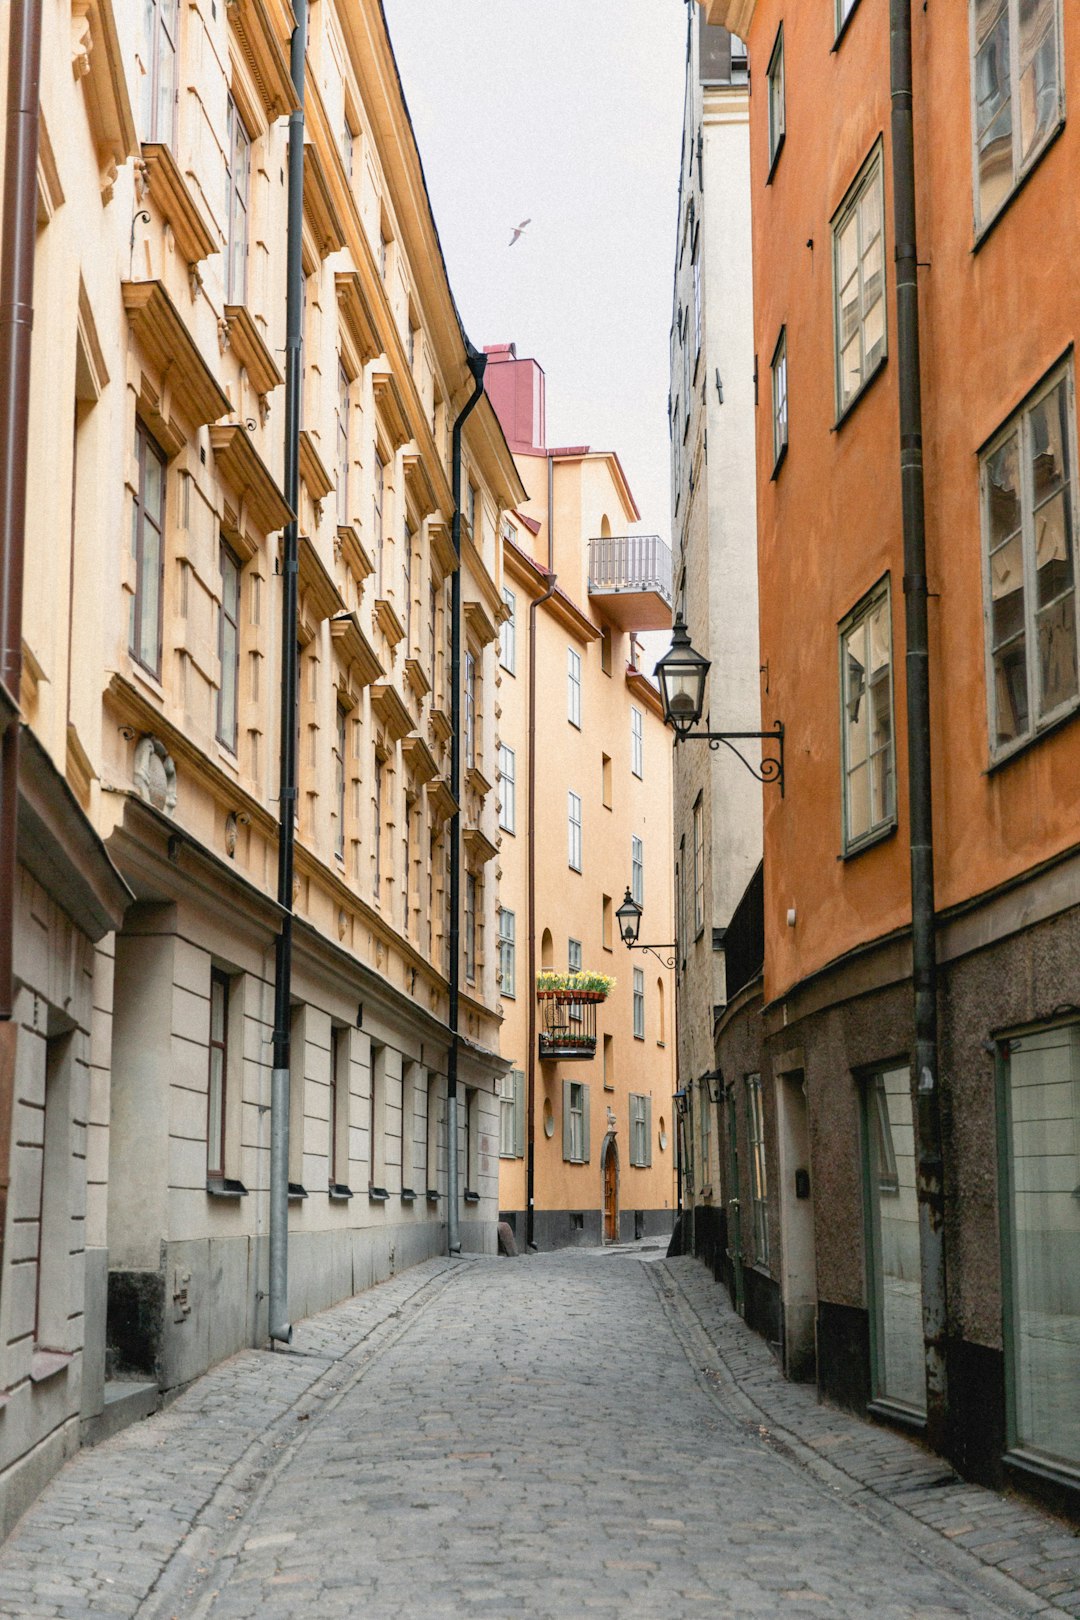 Travel Tips and Stories of Gamla stan in Sweden